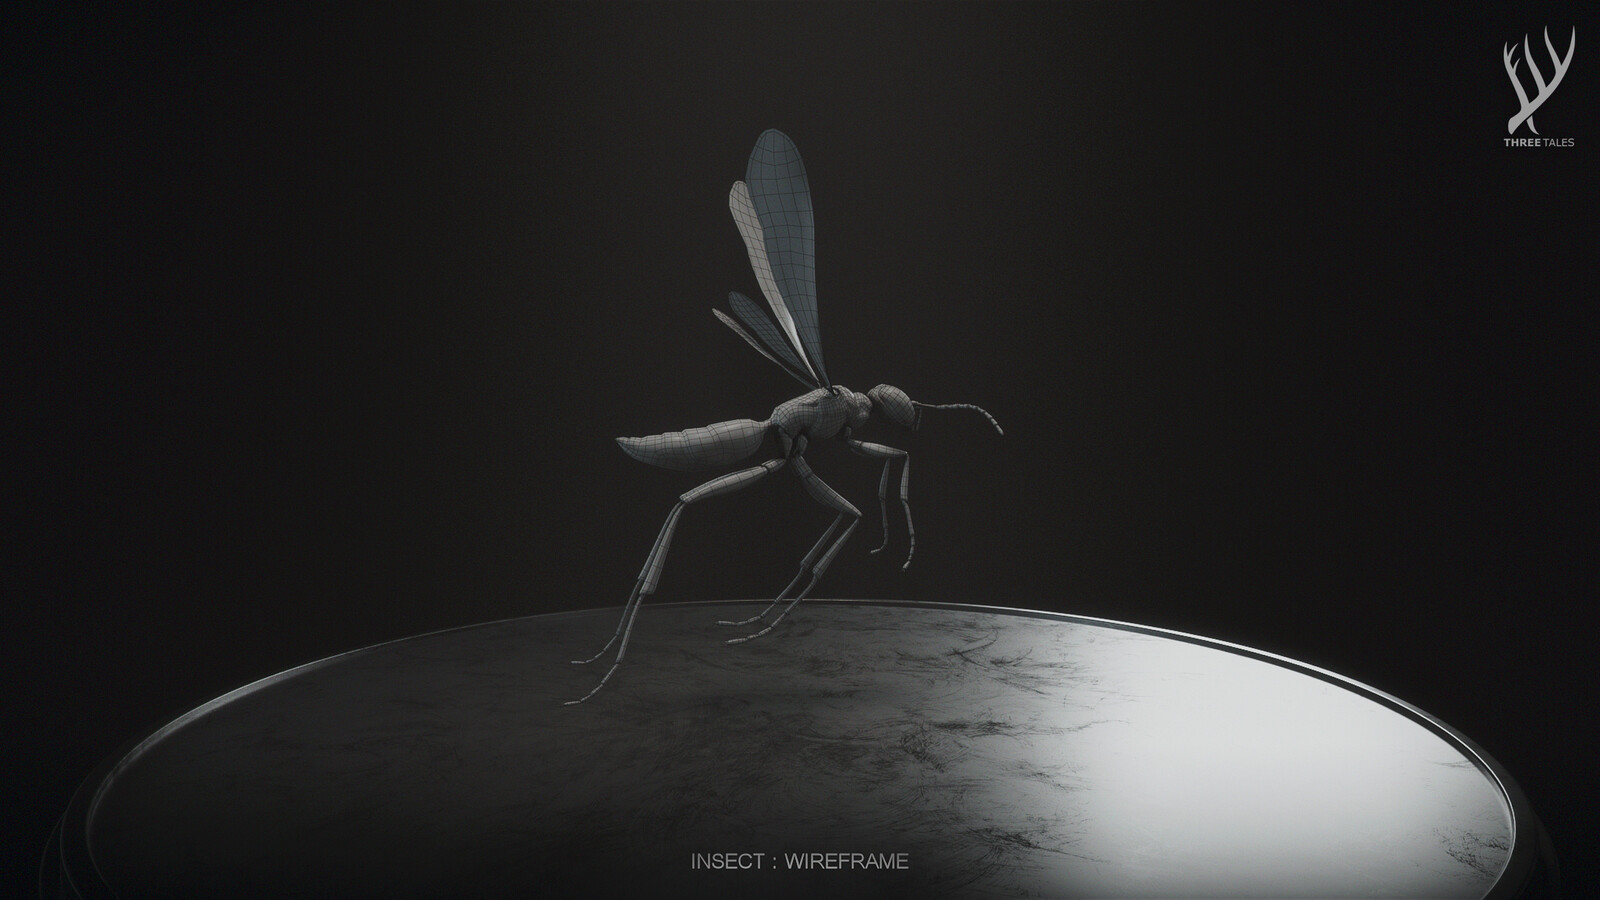 INSECT : WIREFRAME